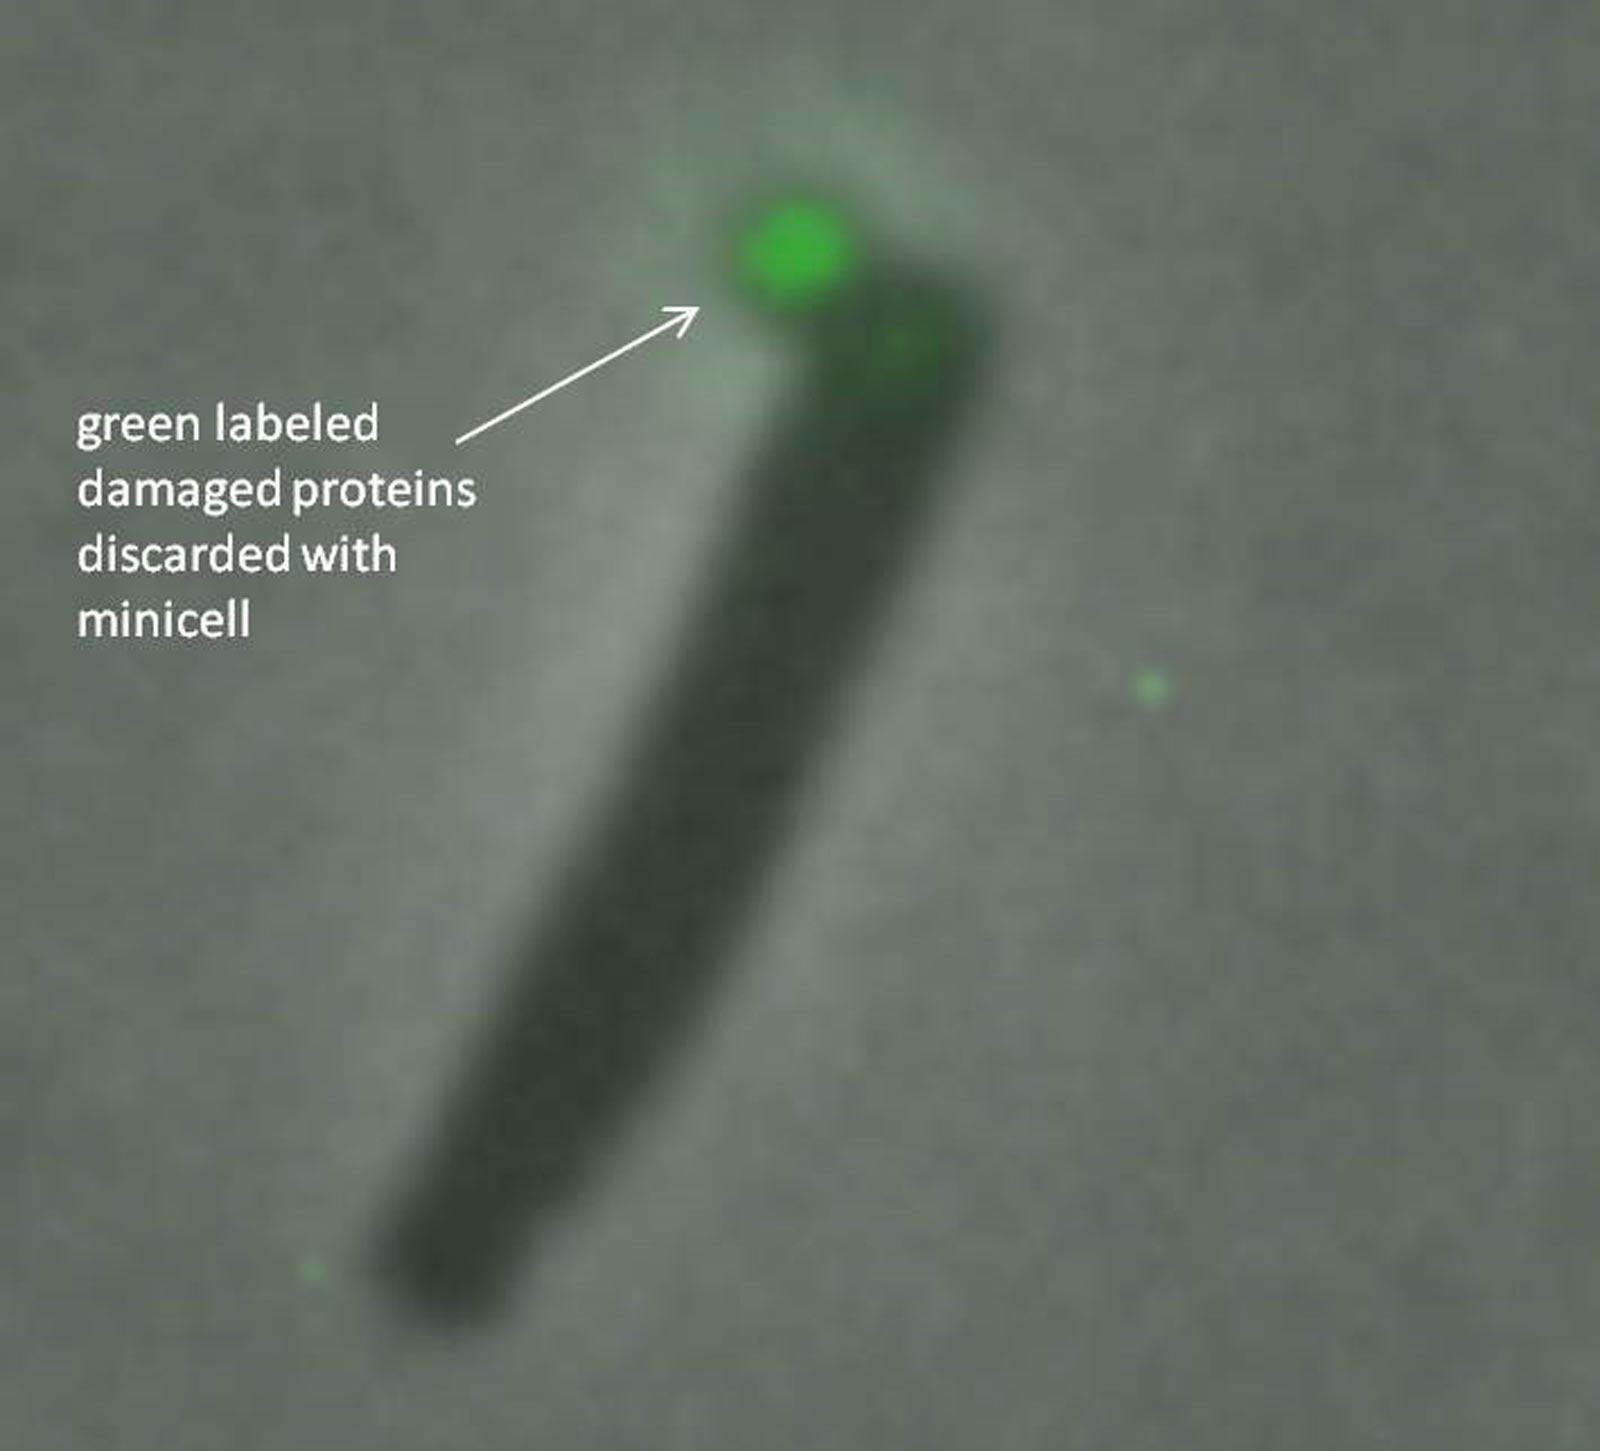 image of a cell bacteria discarding a green flurescent minicell